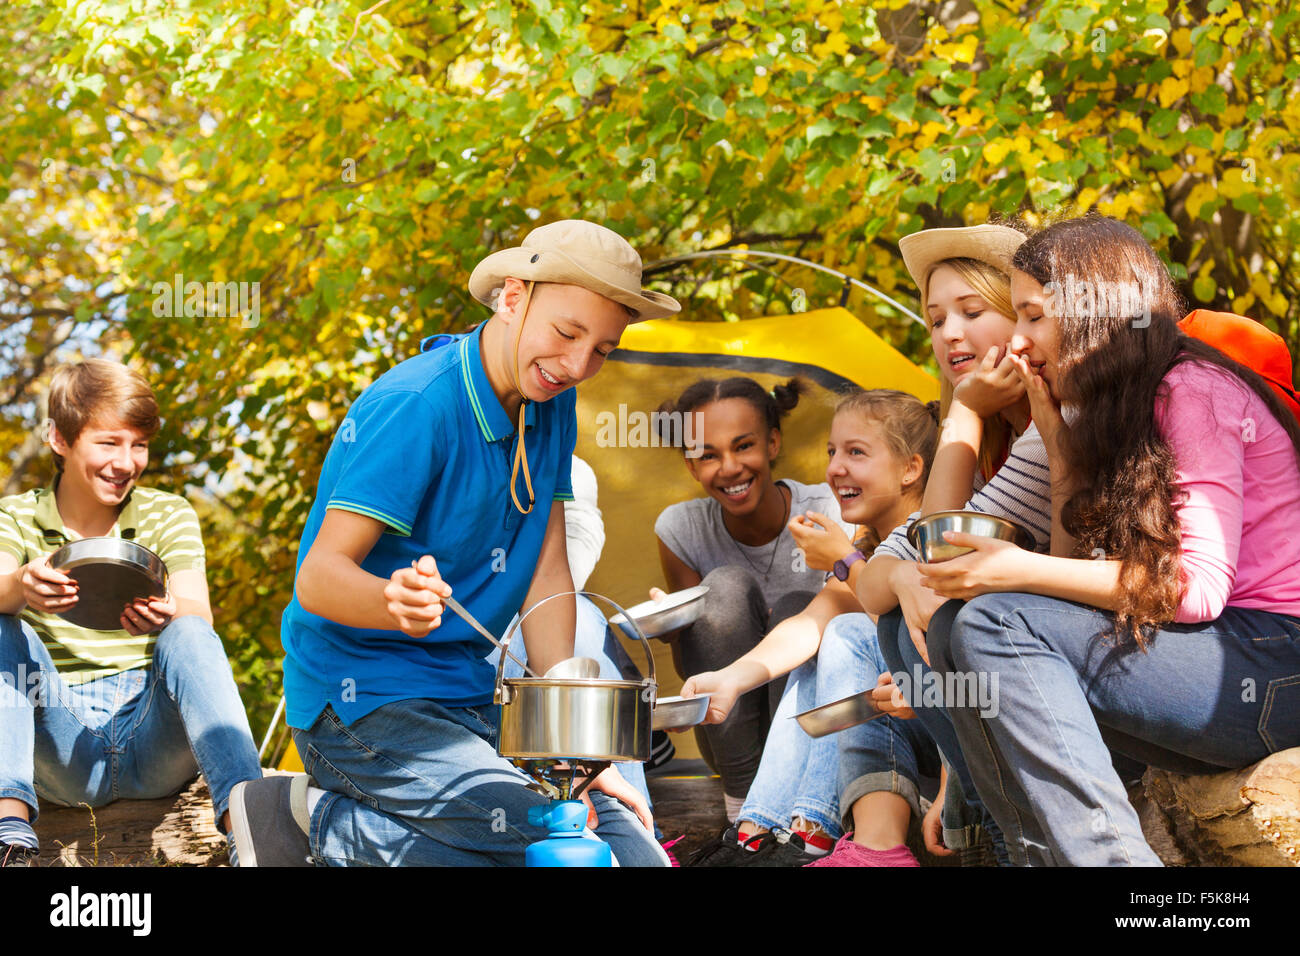 Boy cooks soup in pot for friends at campsite Stock Photo